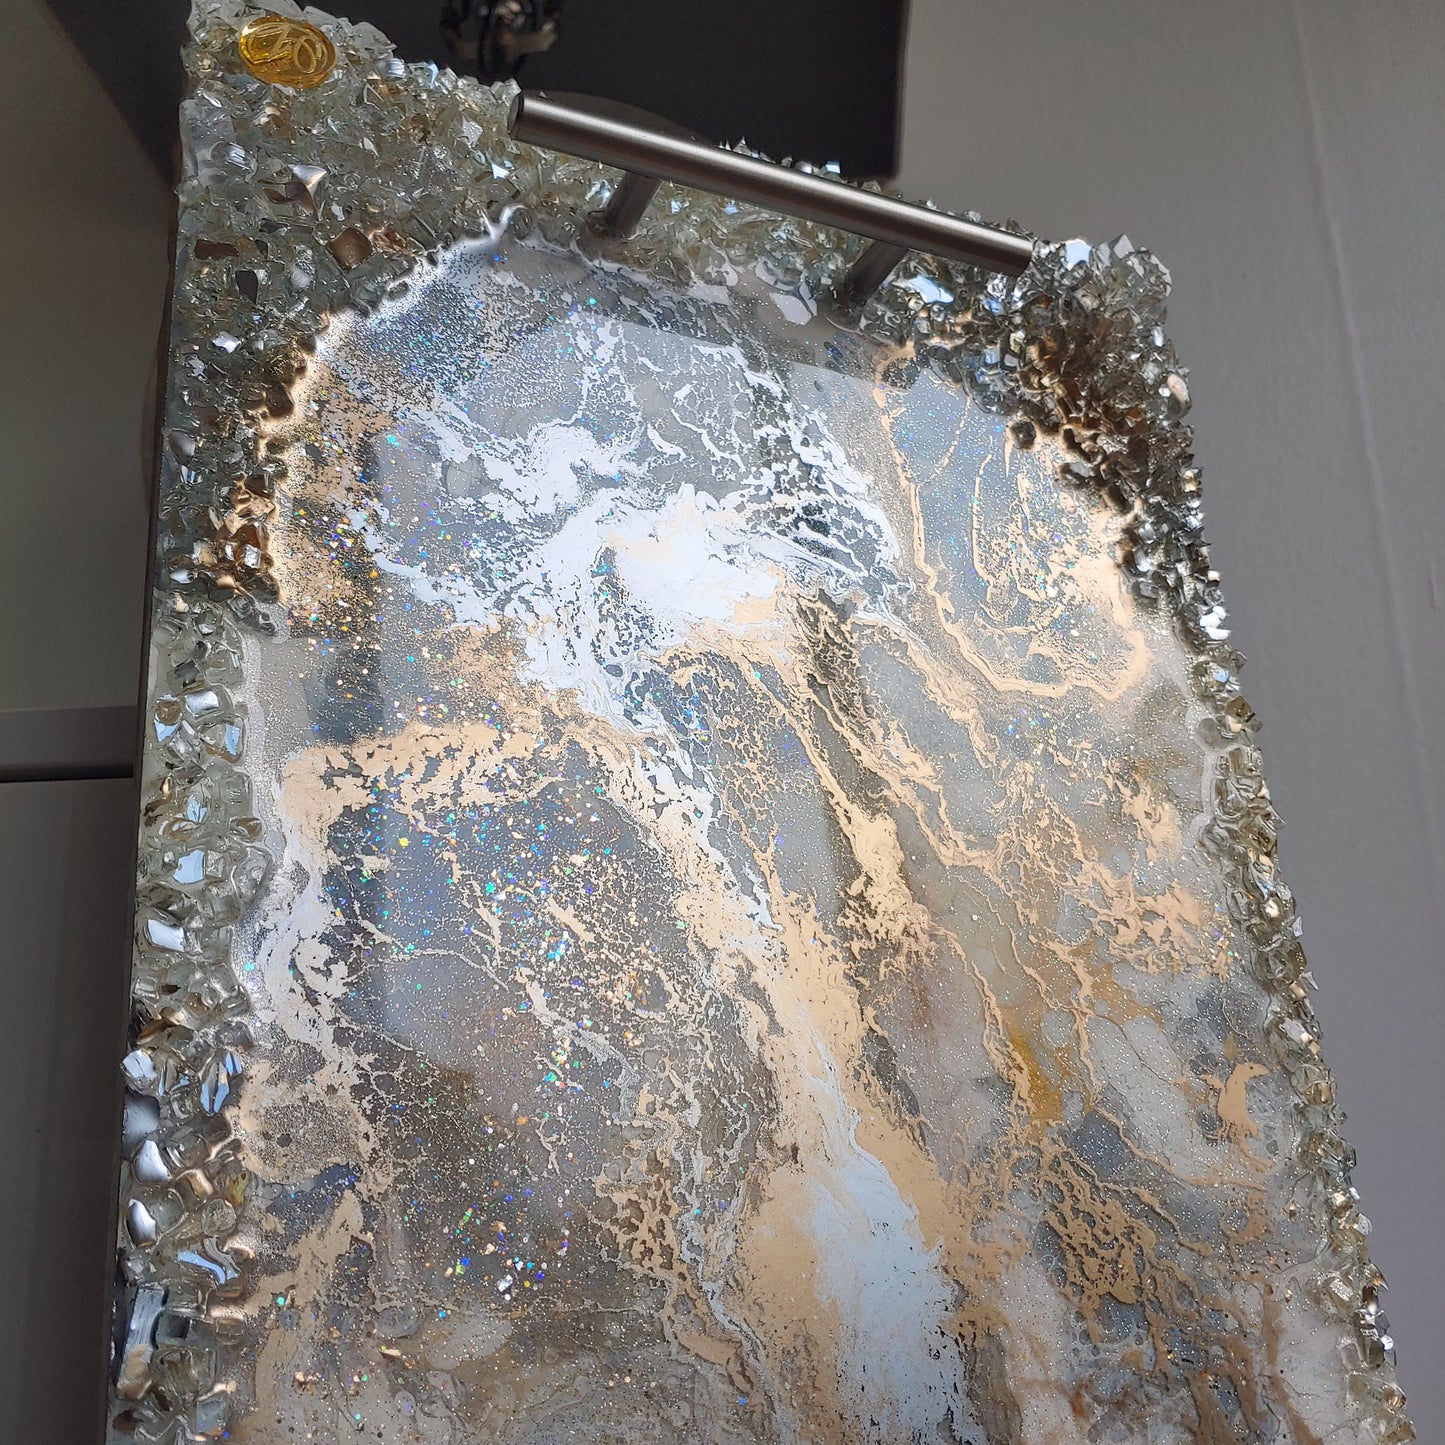 Neutral luxury resin and wood tray with cream, white & grey